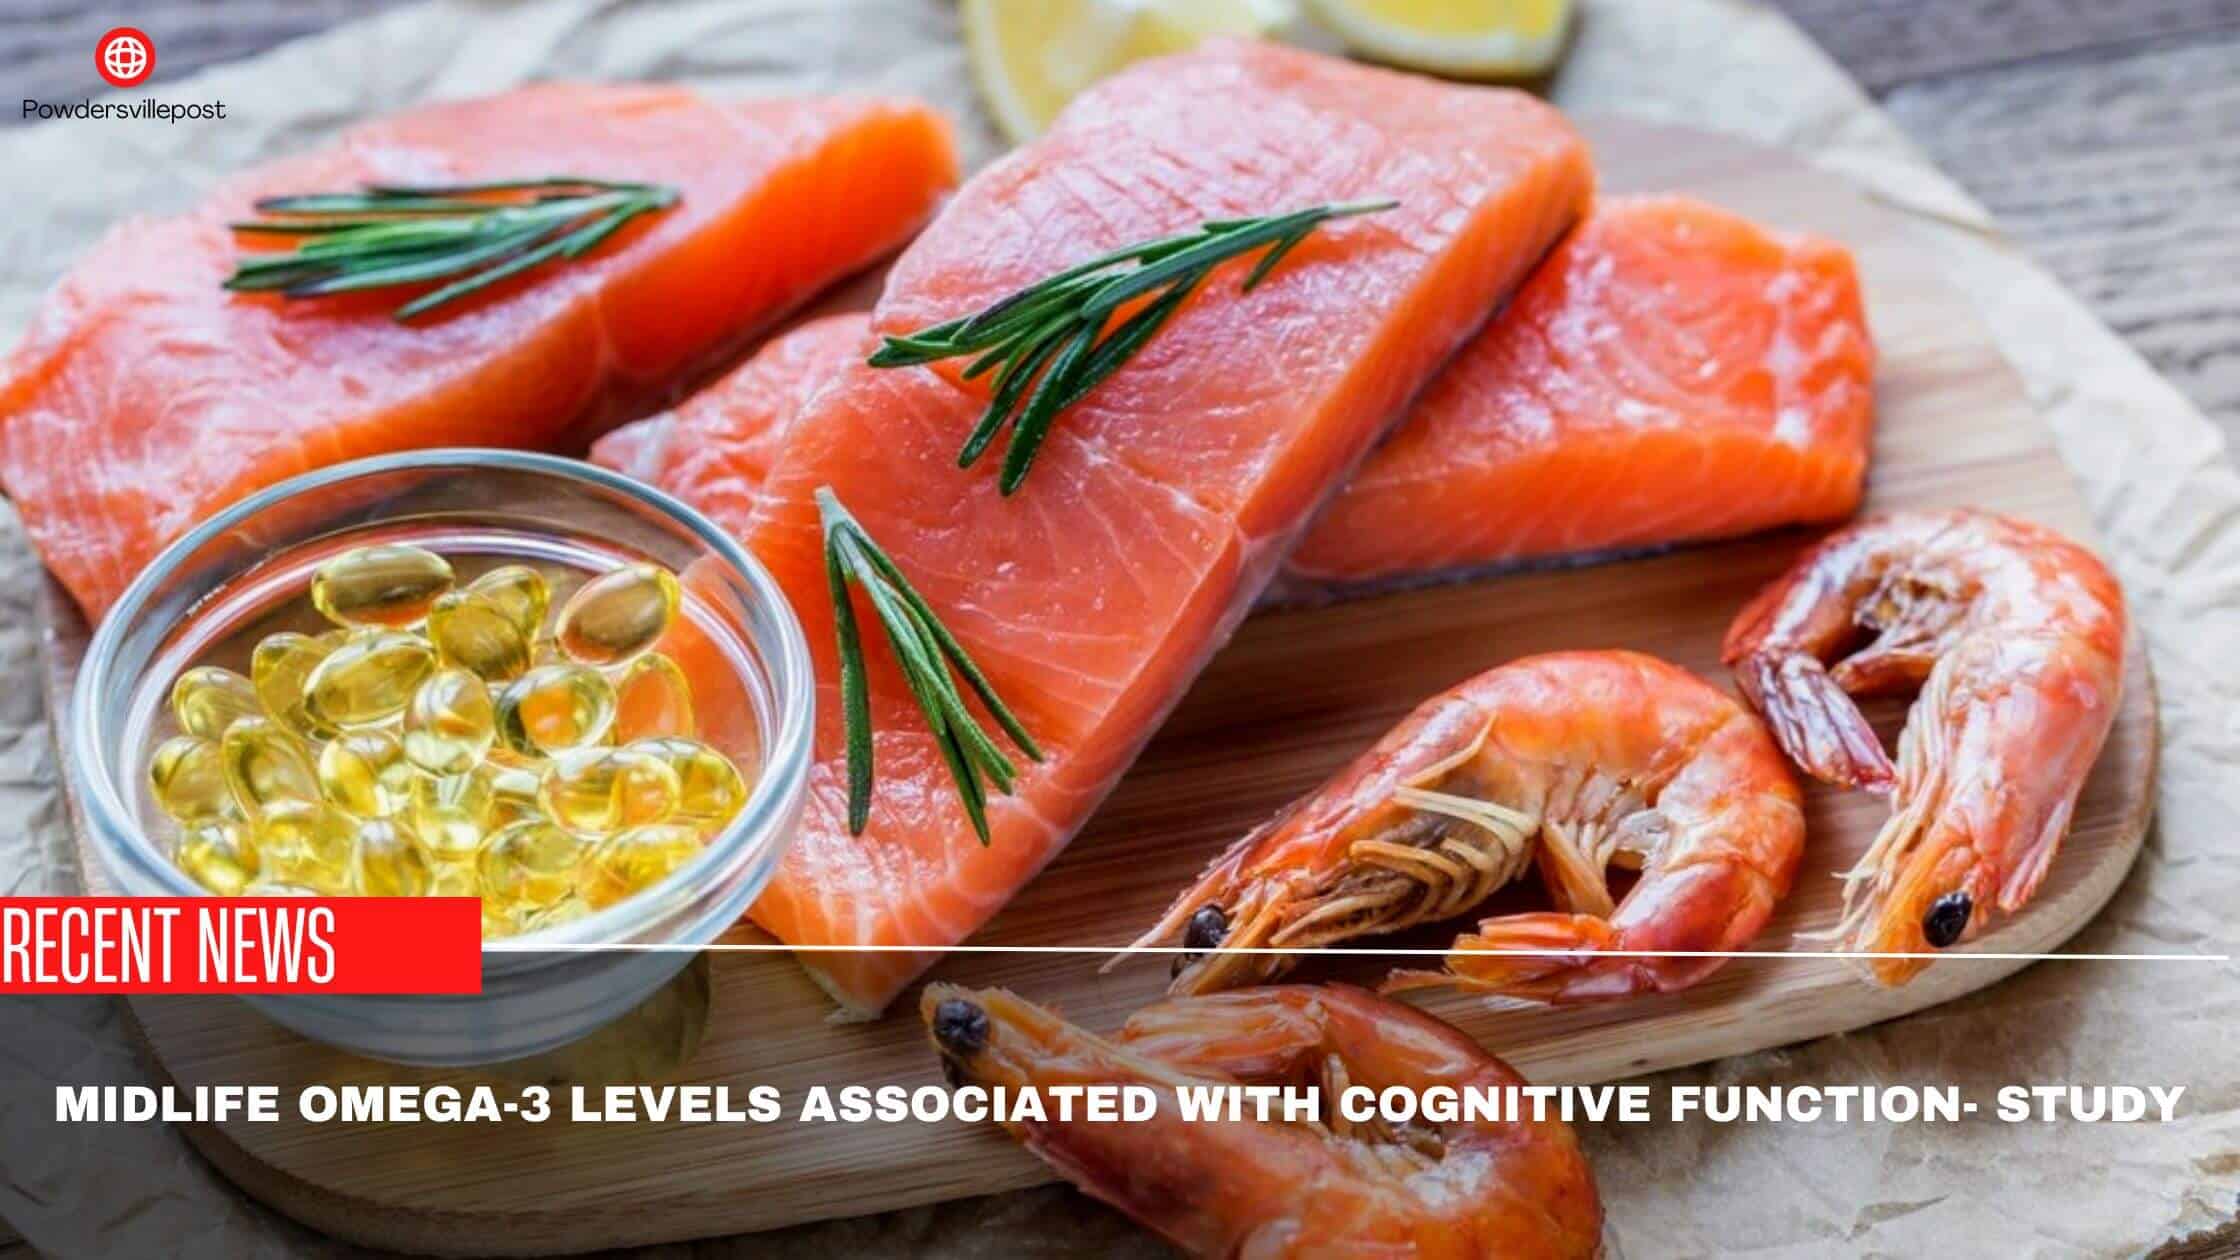 Midlife Omega-3 Levels Associated With Cognitive Function- Study